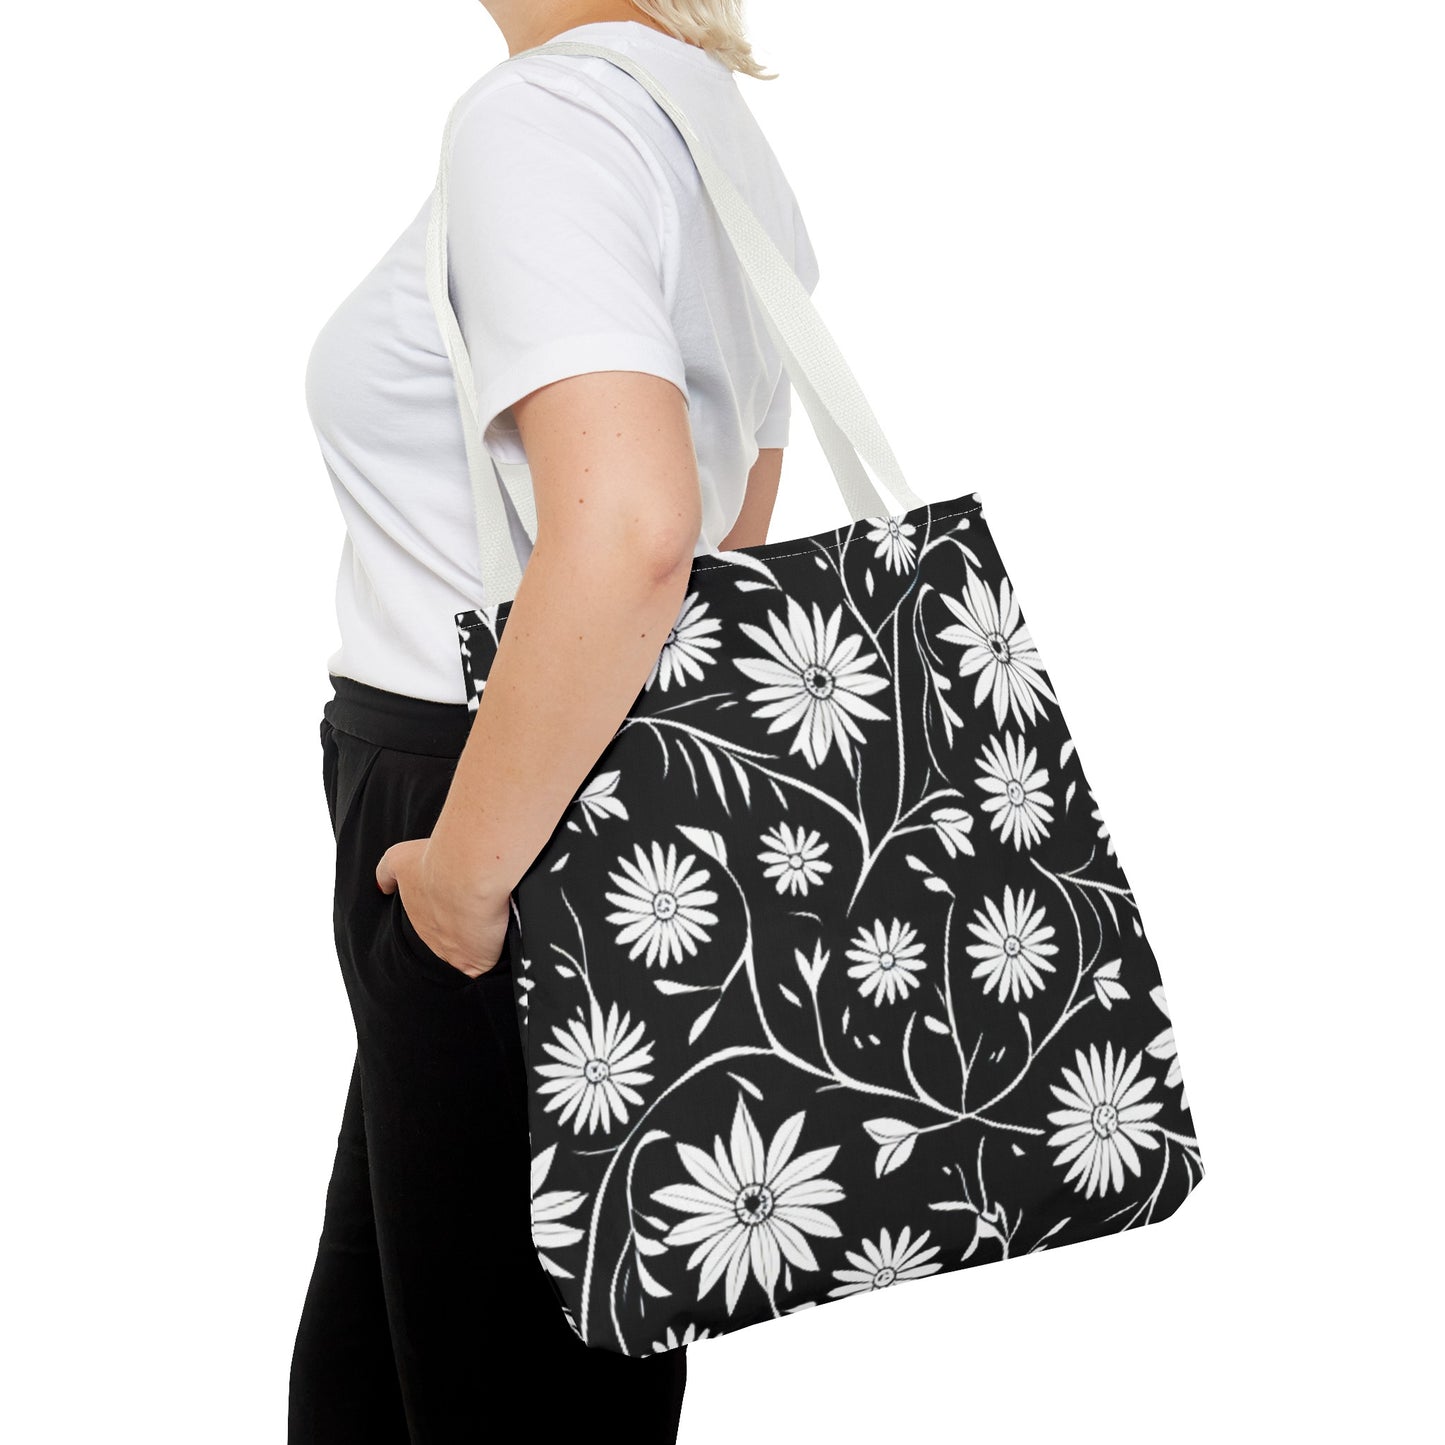 Field of Scandinavian Black and White Daisies 1970s Floral Pattern Book Tote Bag